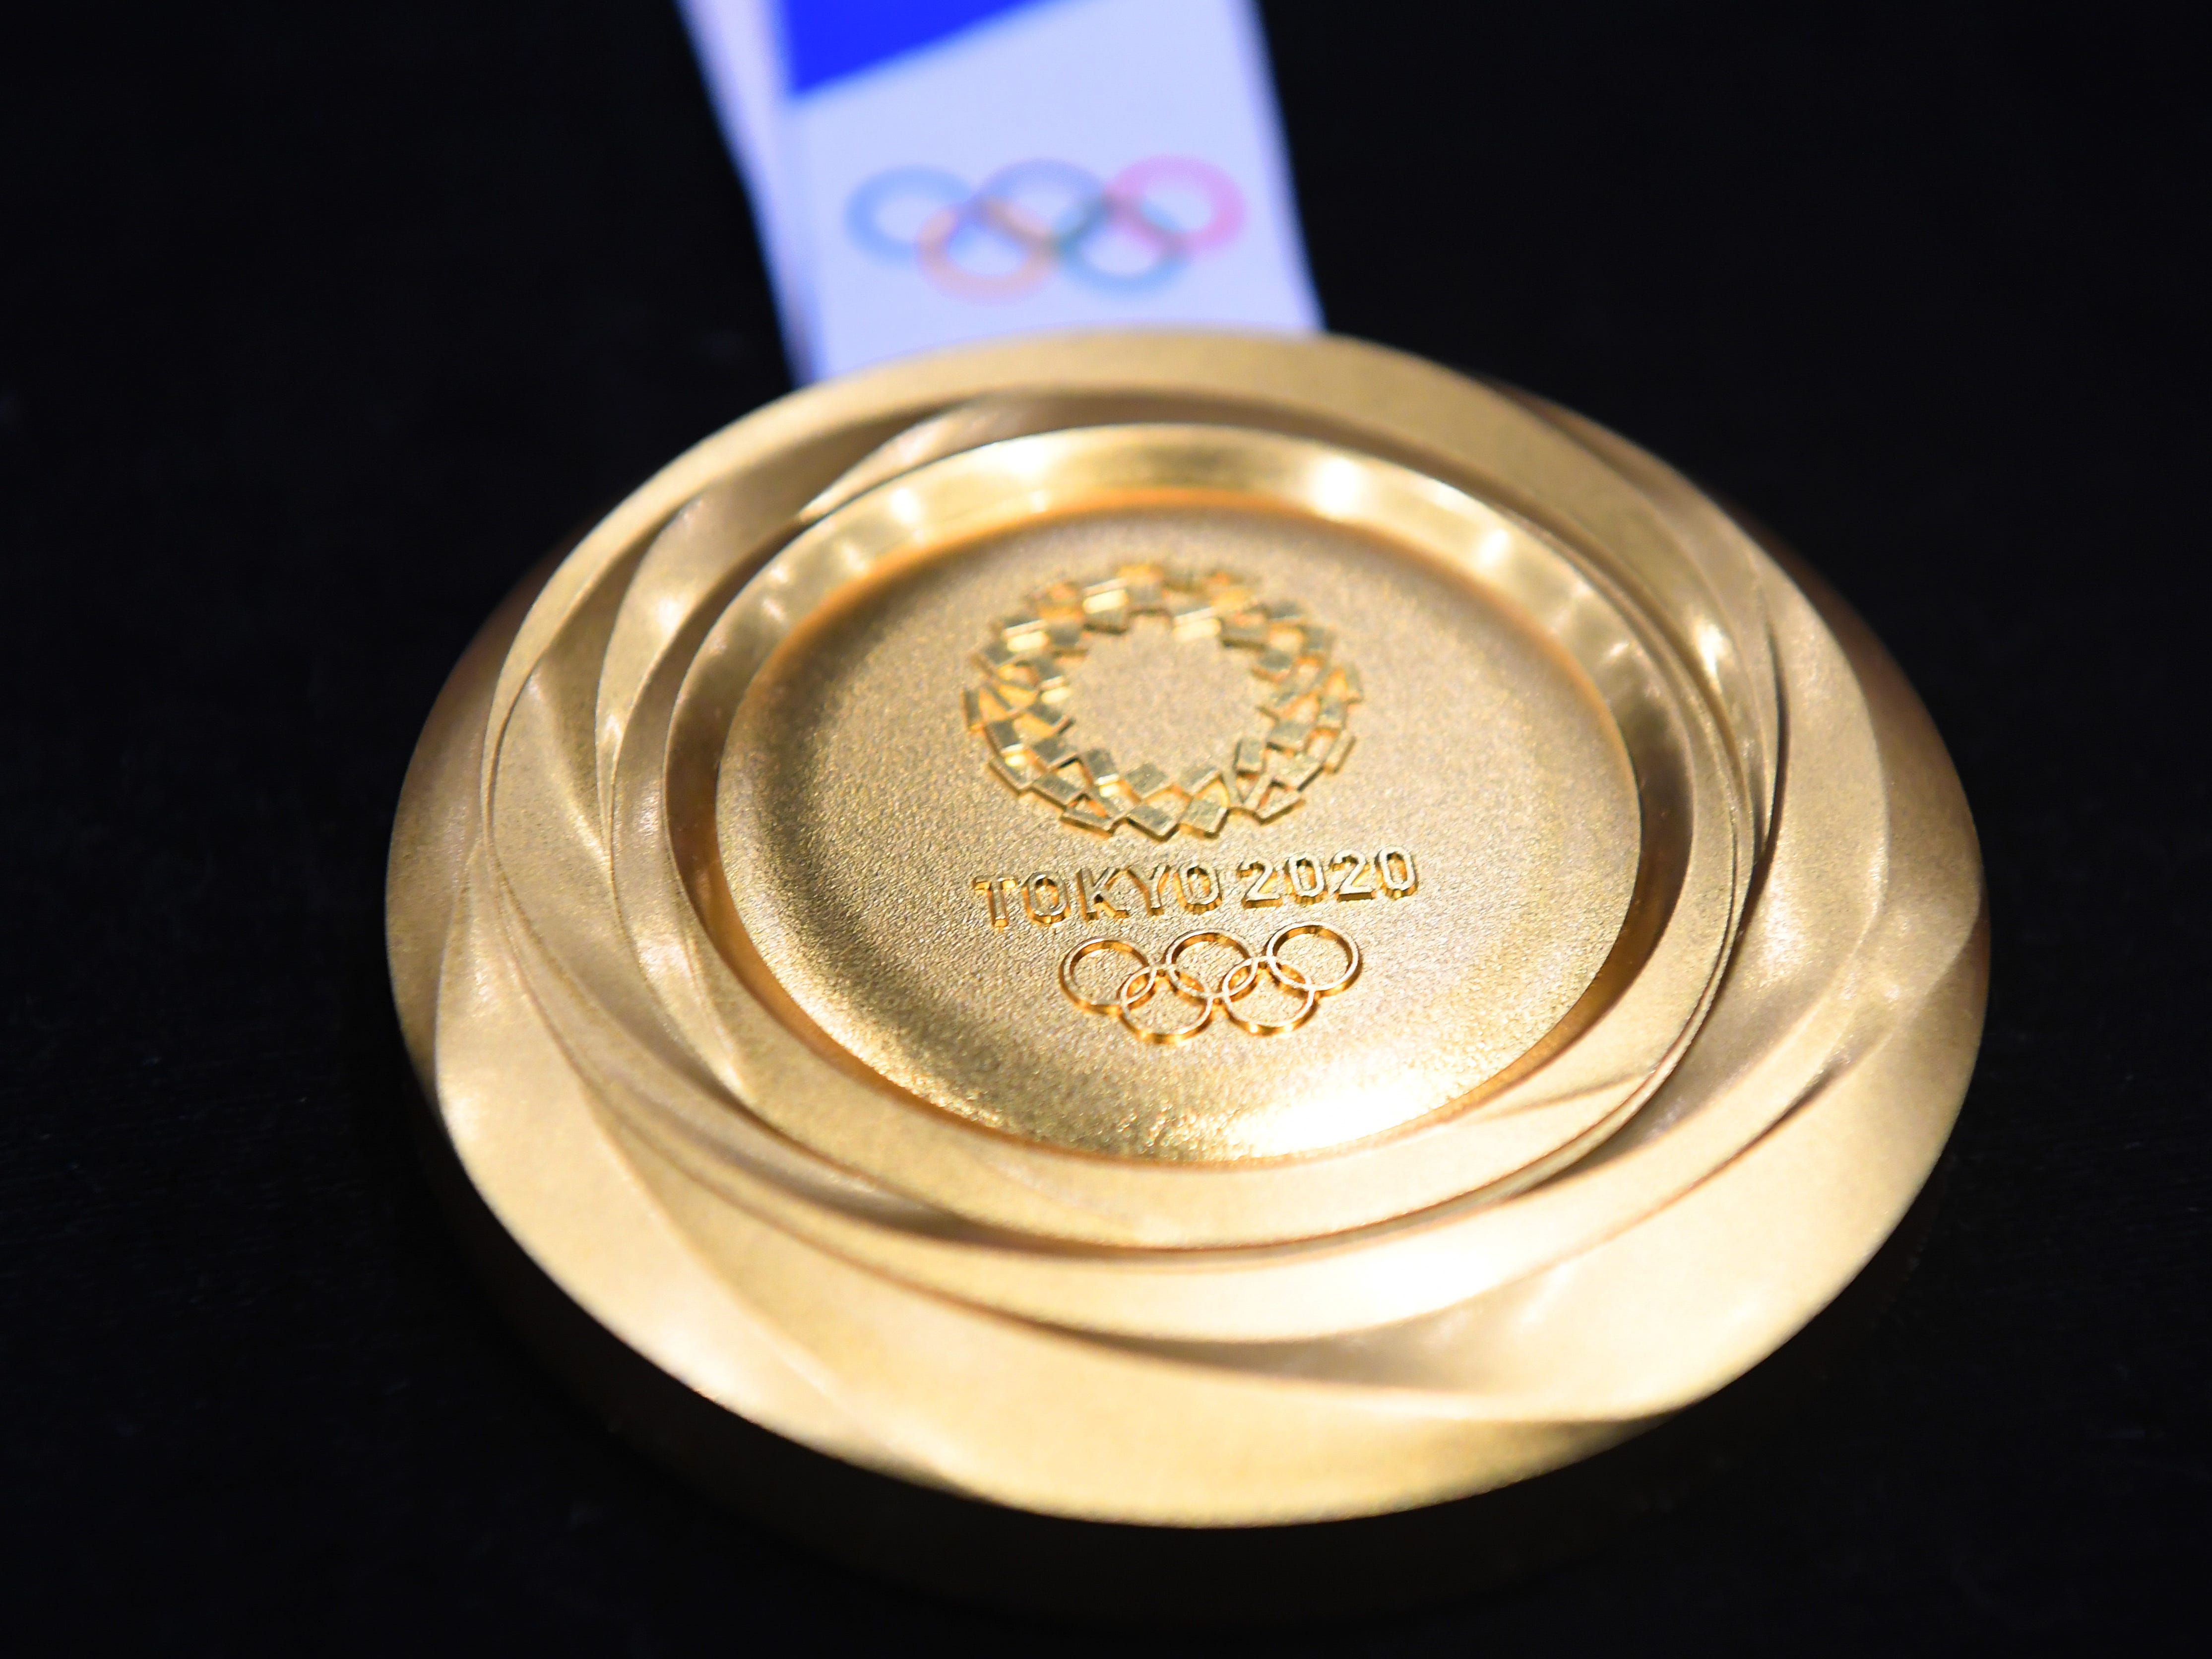 Another view of the gold medal for the 2020 Summer Olympics in Tokyo.